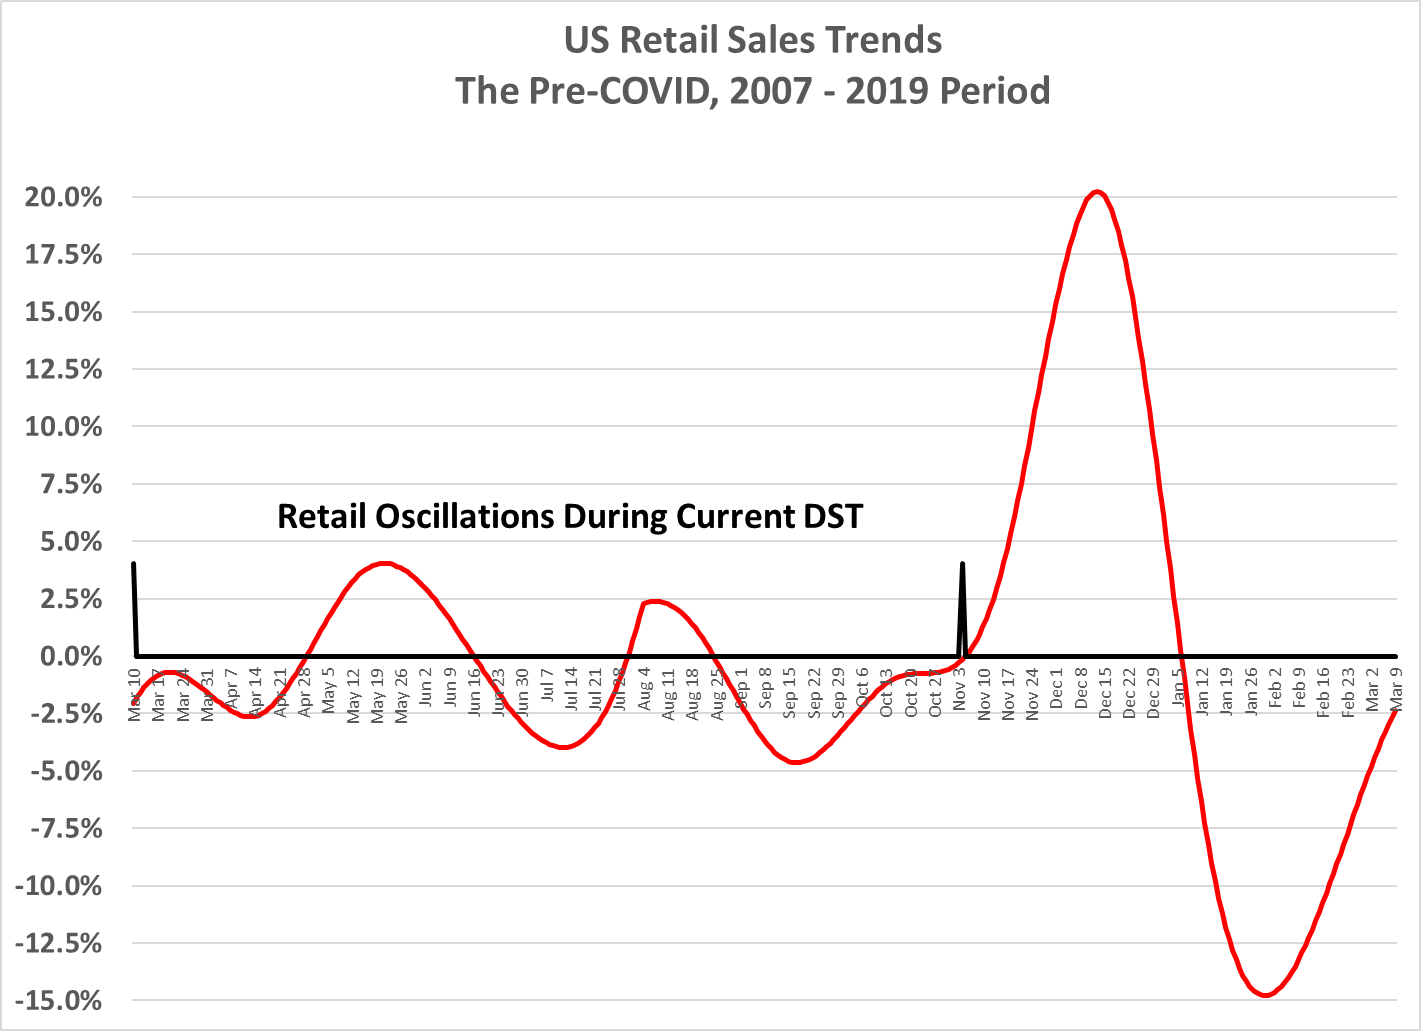 Retail Oscillations During Current DST